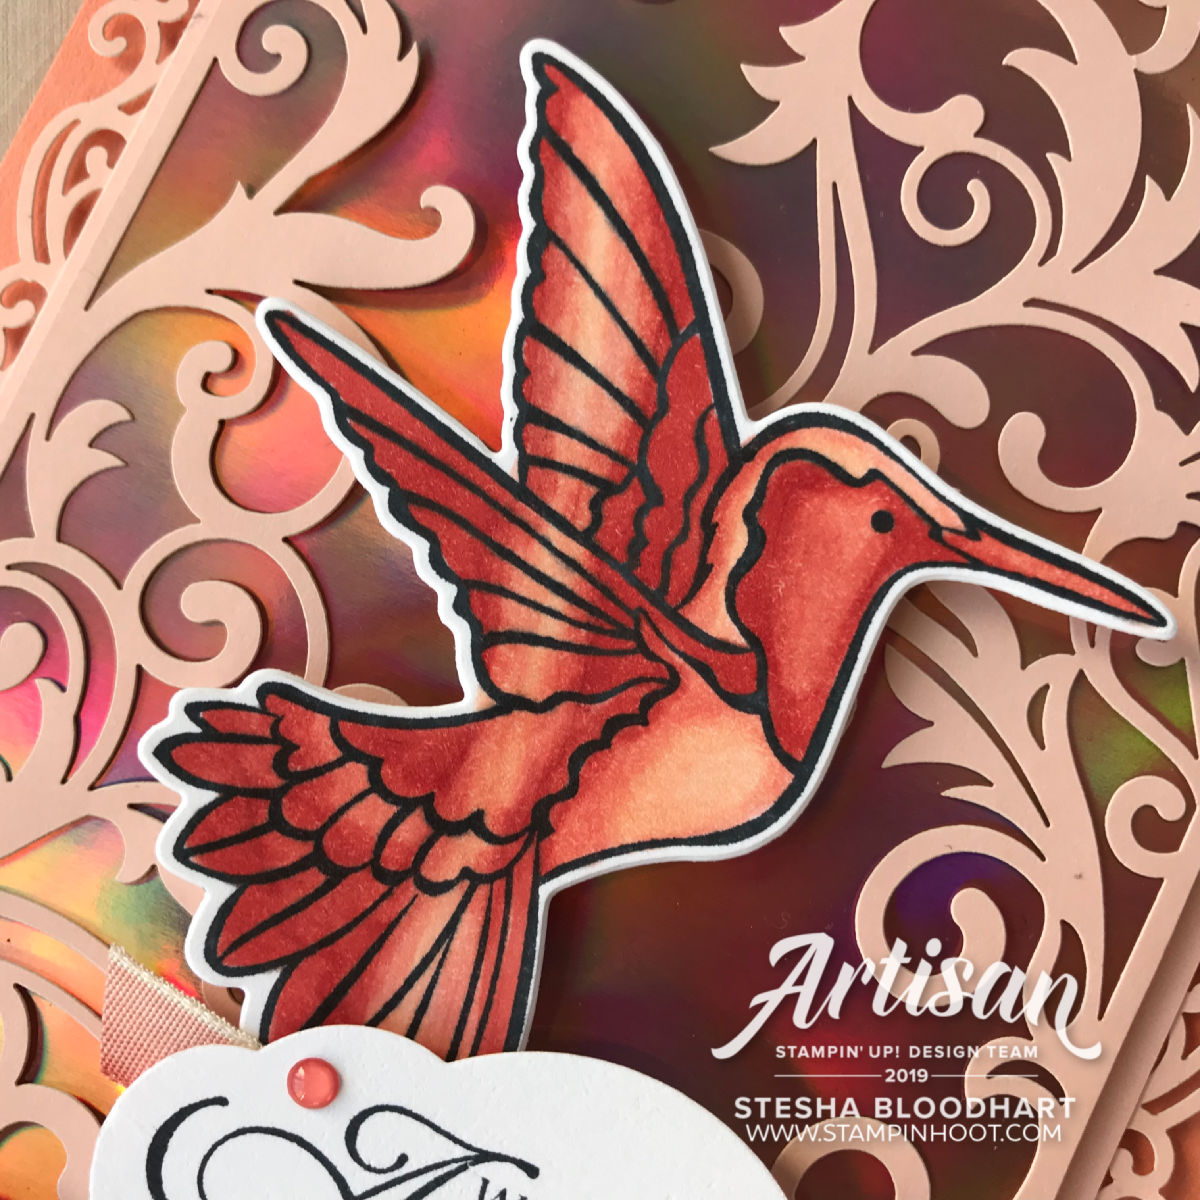 Humming Along Bundle and Grapefruit Grove Foil Sheets by Stampin' Up! Card created by Stesha Bloodhart, Stampin' Hoot! #stampreviewcrew #steshabloodhart #stampinhoot